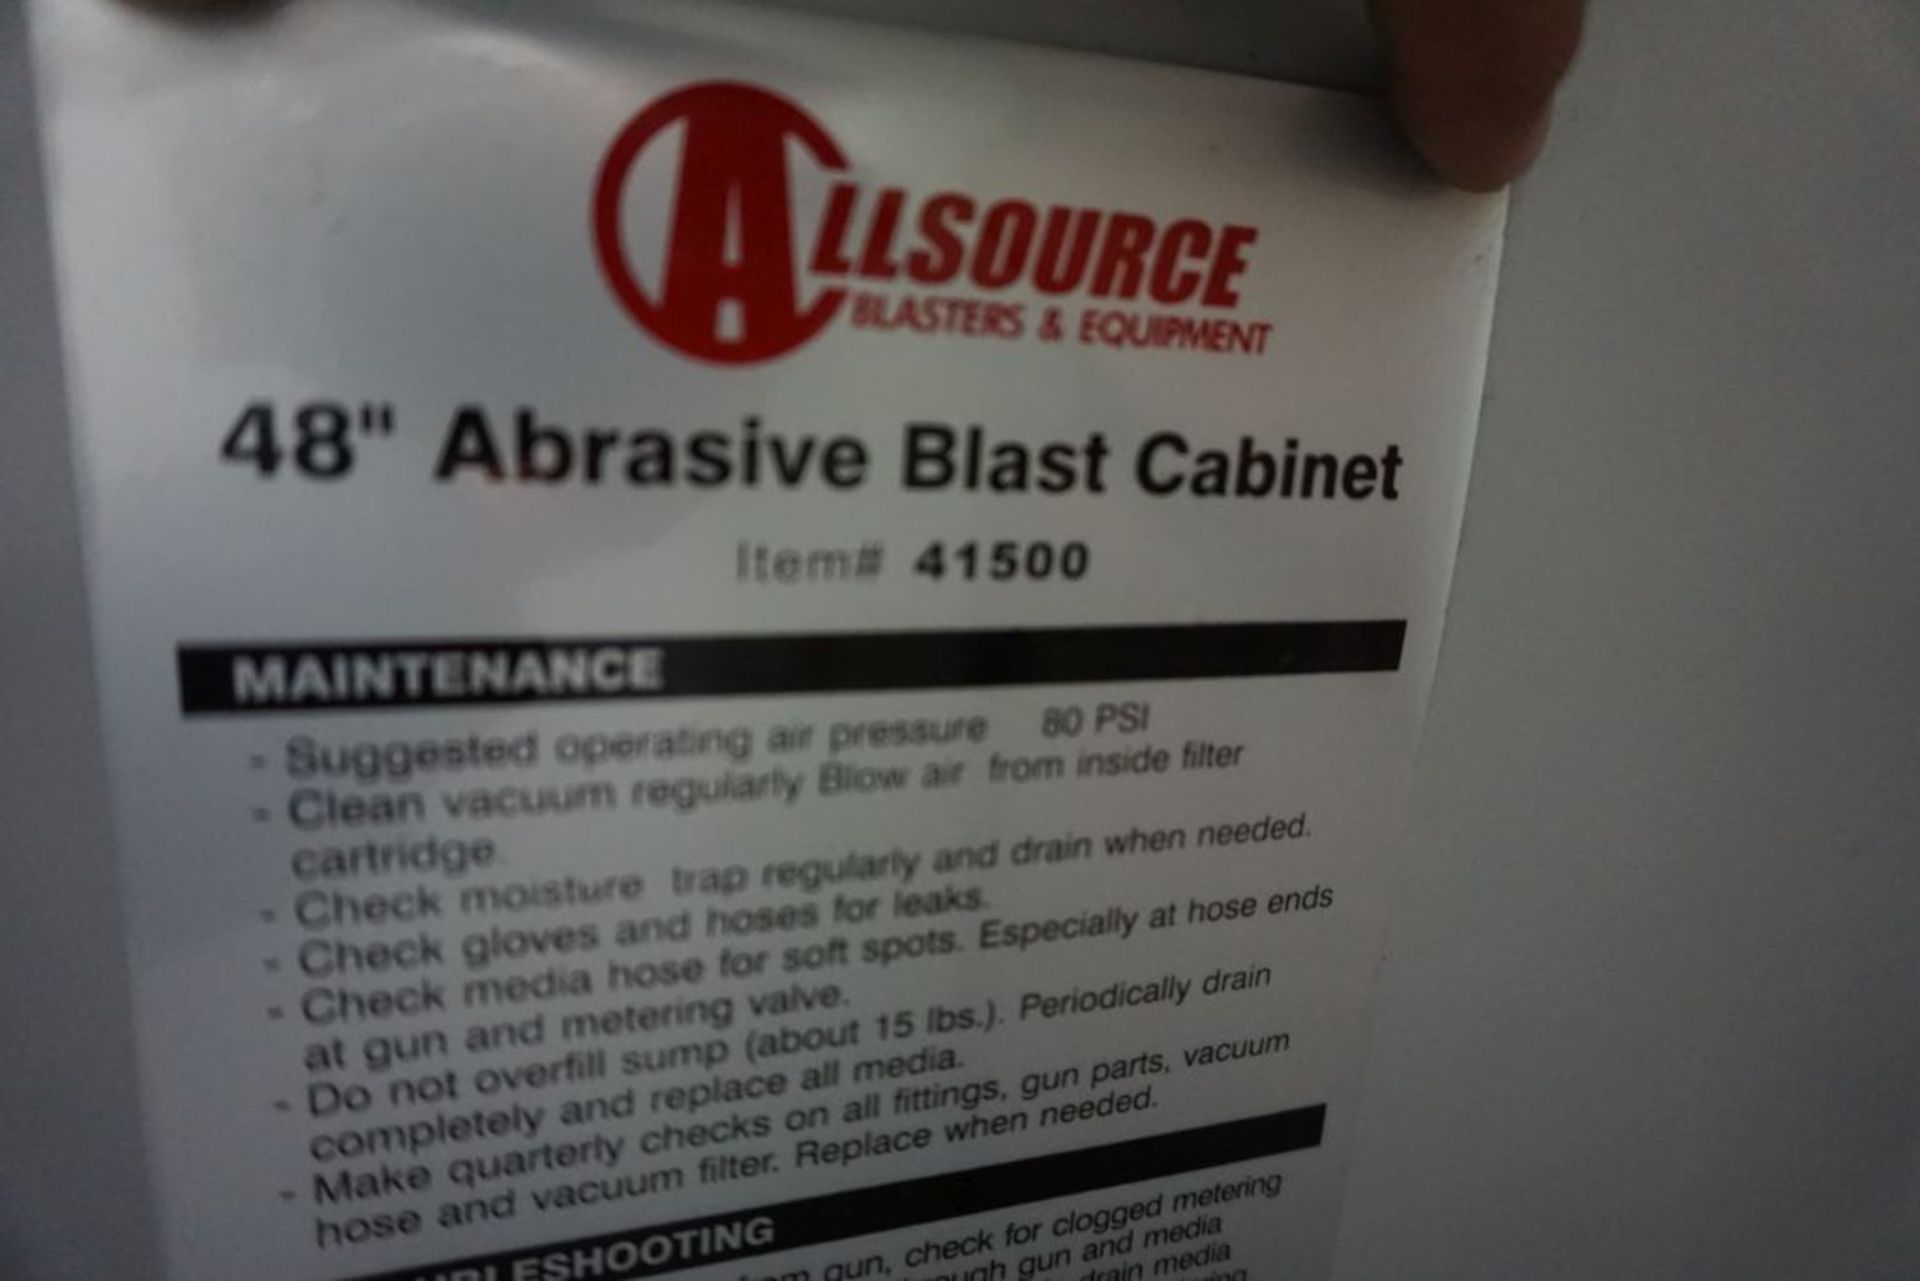 All Source 48" Blast Cabinet | Model No. 41500 - Image 7 of 7